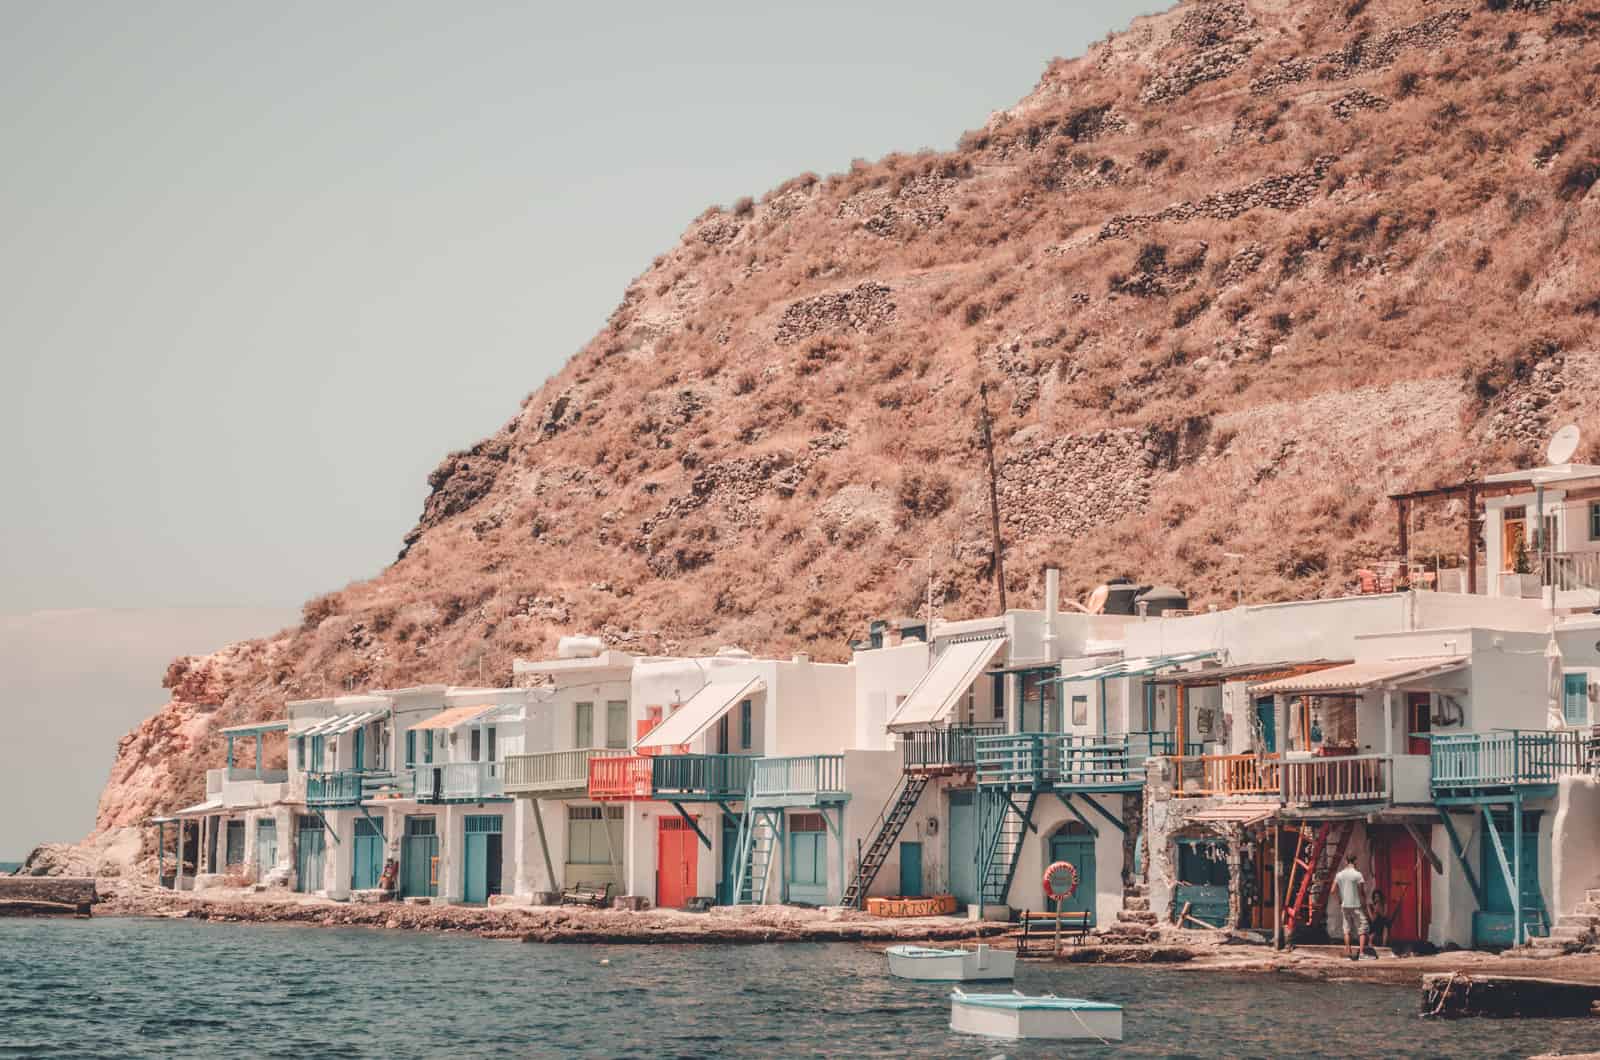 Exploring the magical Cycladic island of Milos